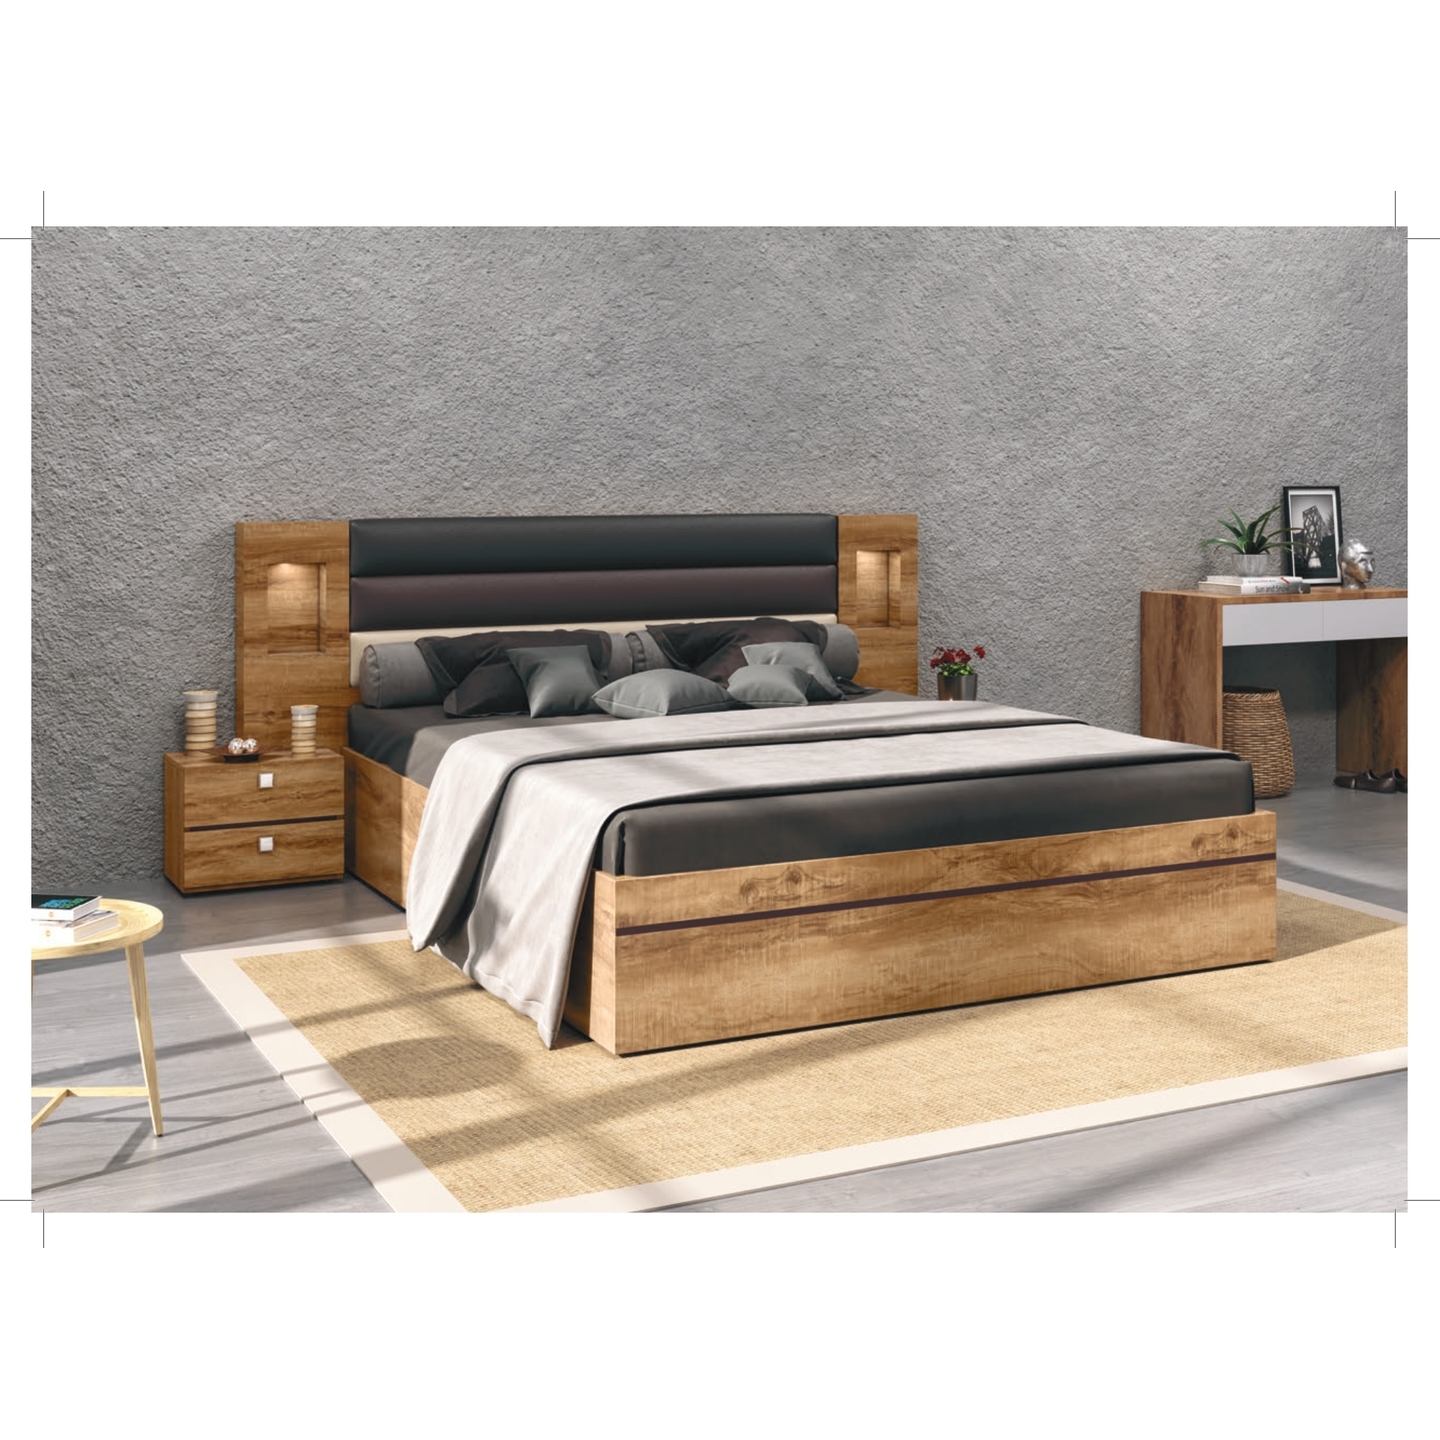 RLF King Size Bed 78x72 Venus Bed With Side Box In Brown Colour